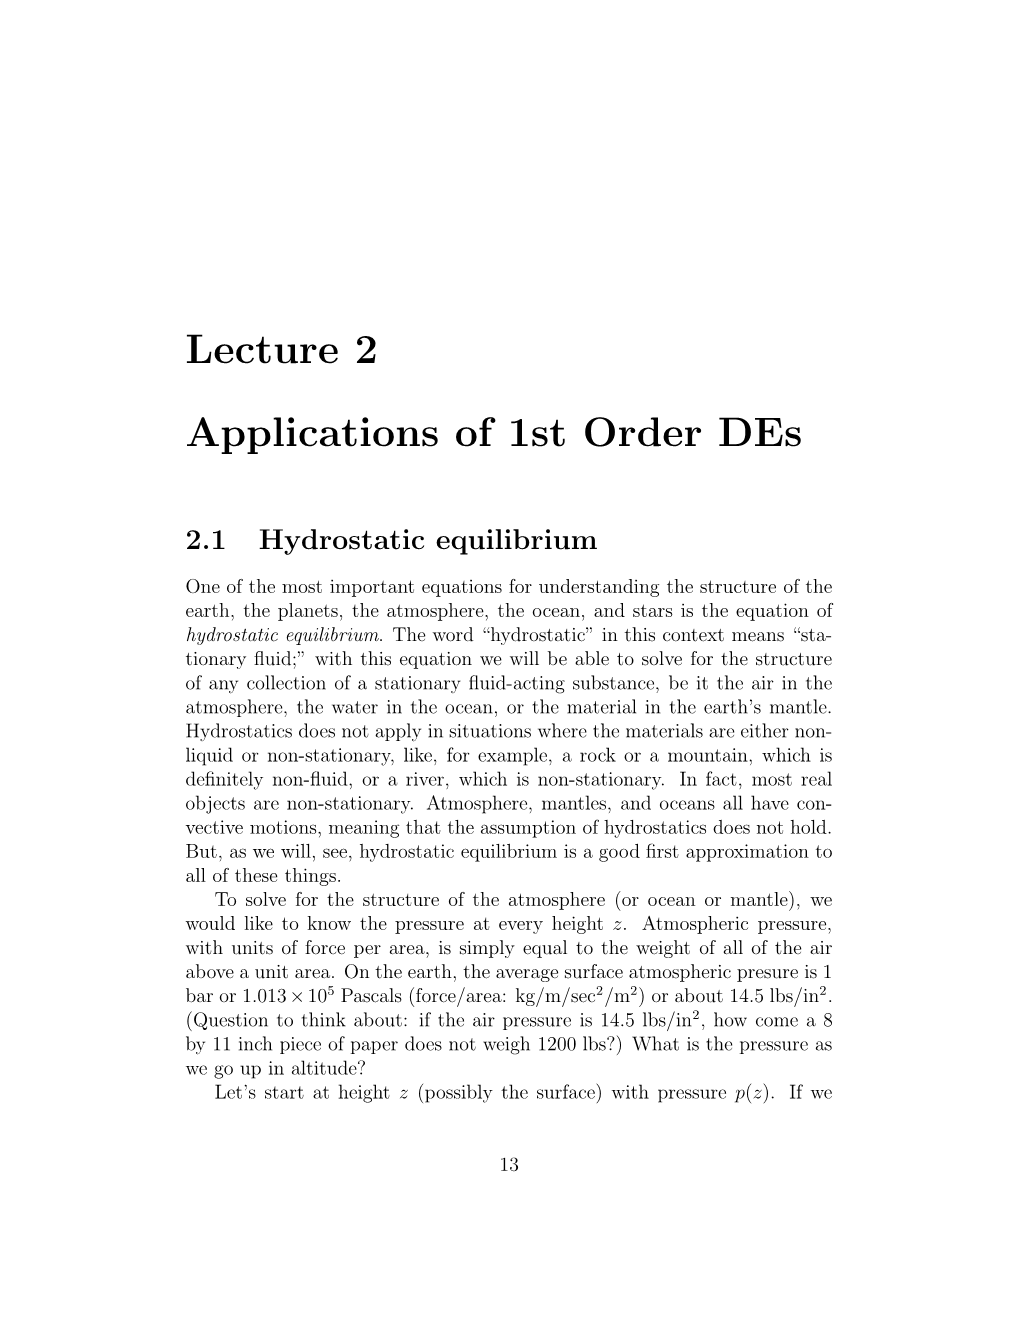 Lecture 2 Applications of 1St Order